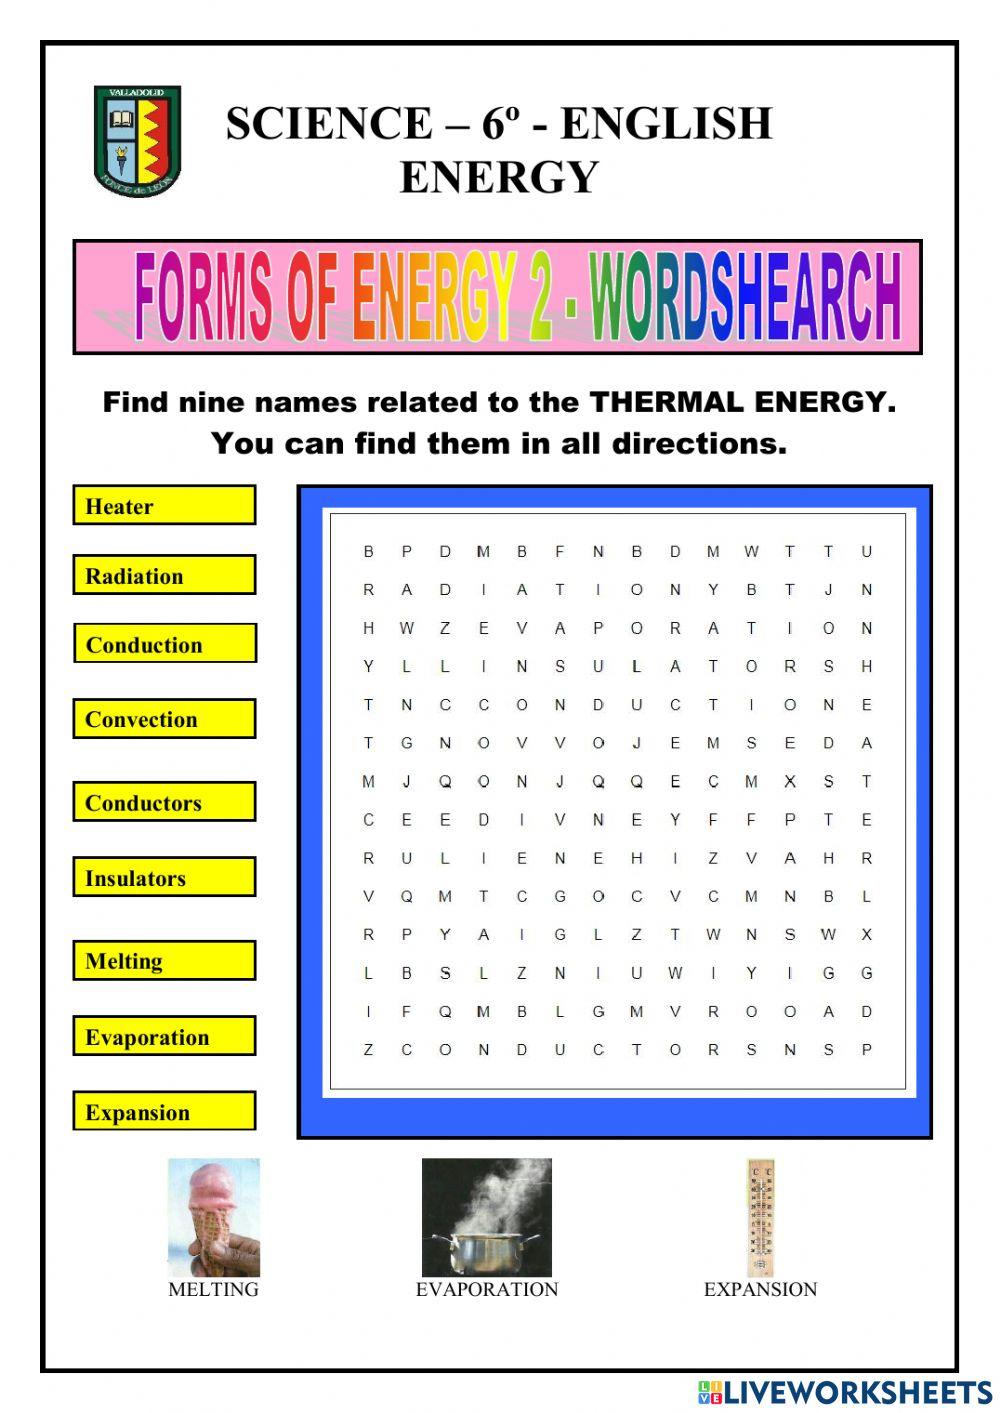 Energy: forms of energy 2